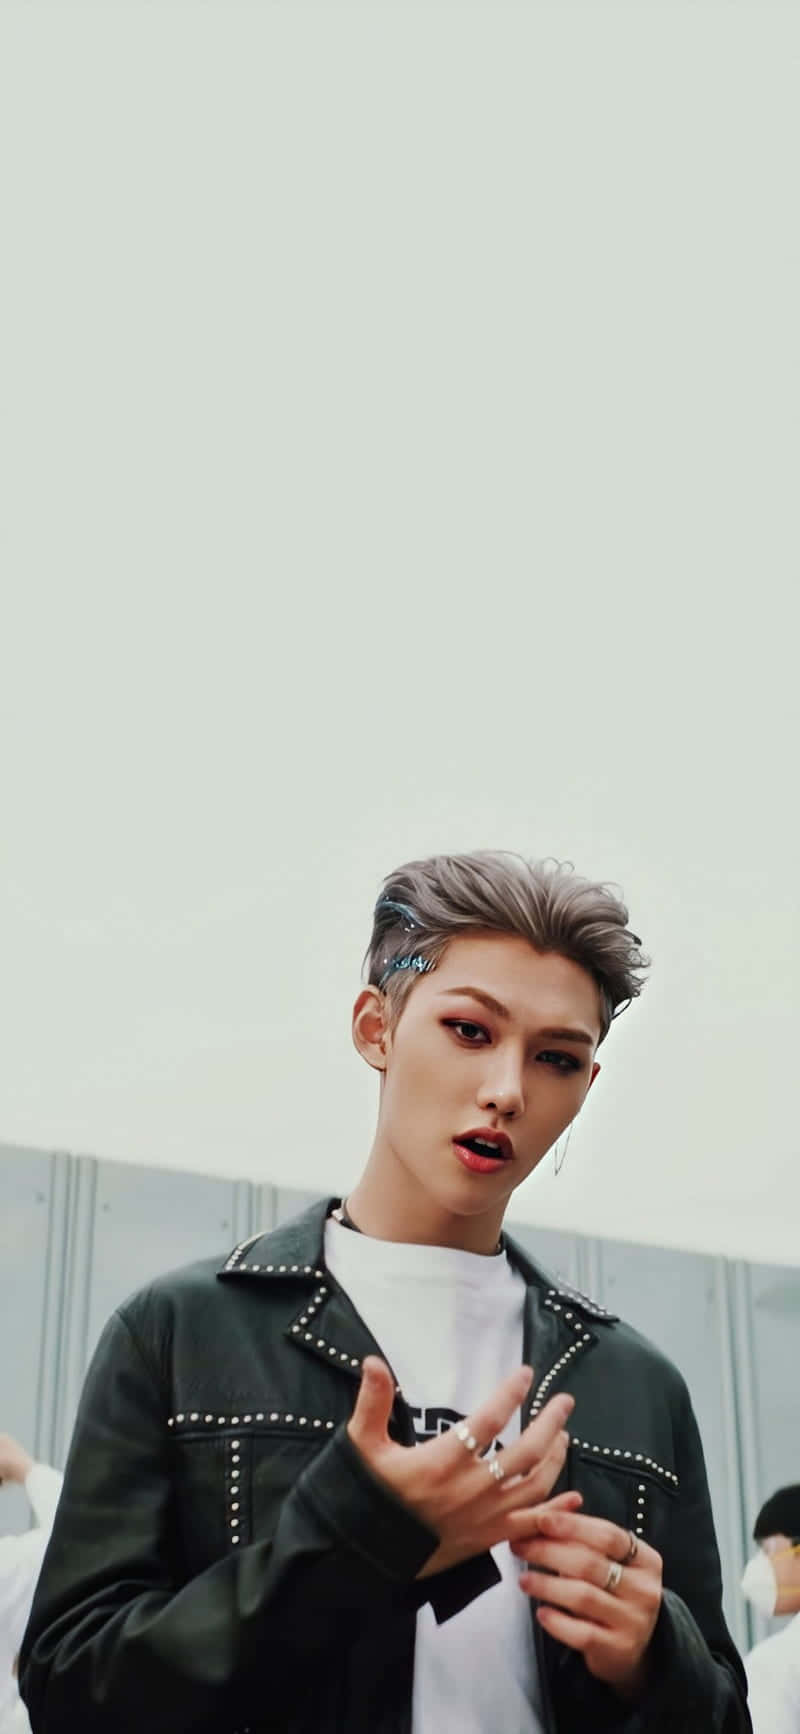 Felix of Stray Kids Impressing with His Visuals. Wallpaper